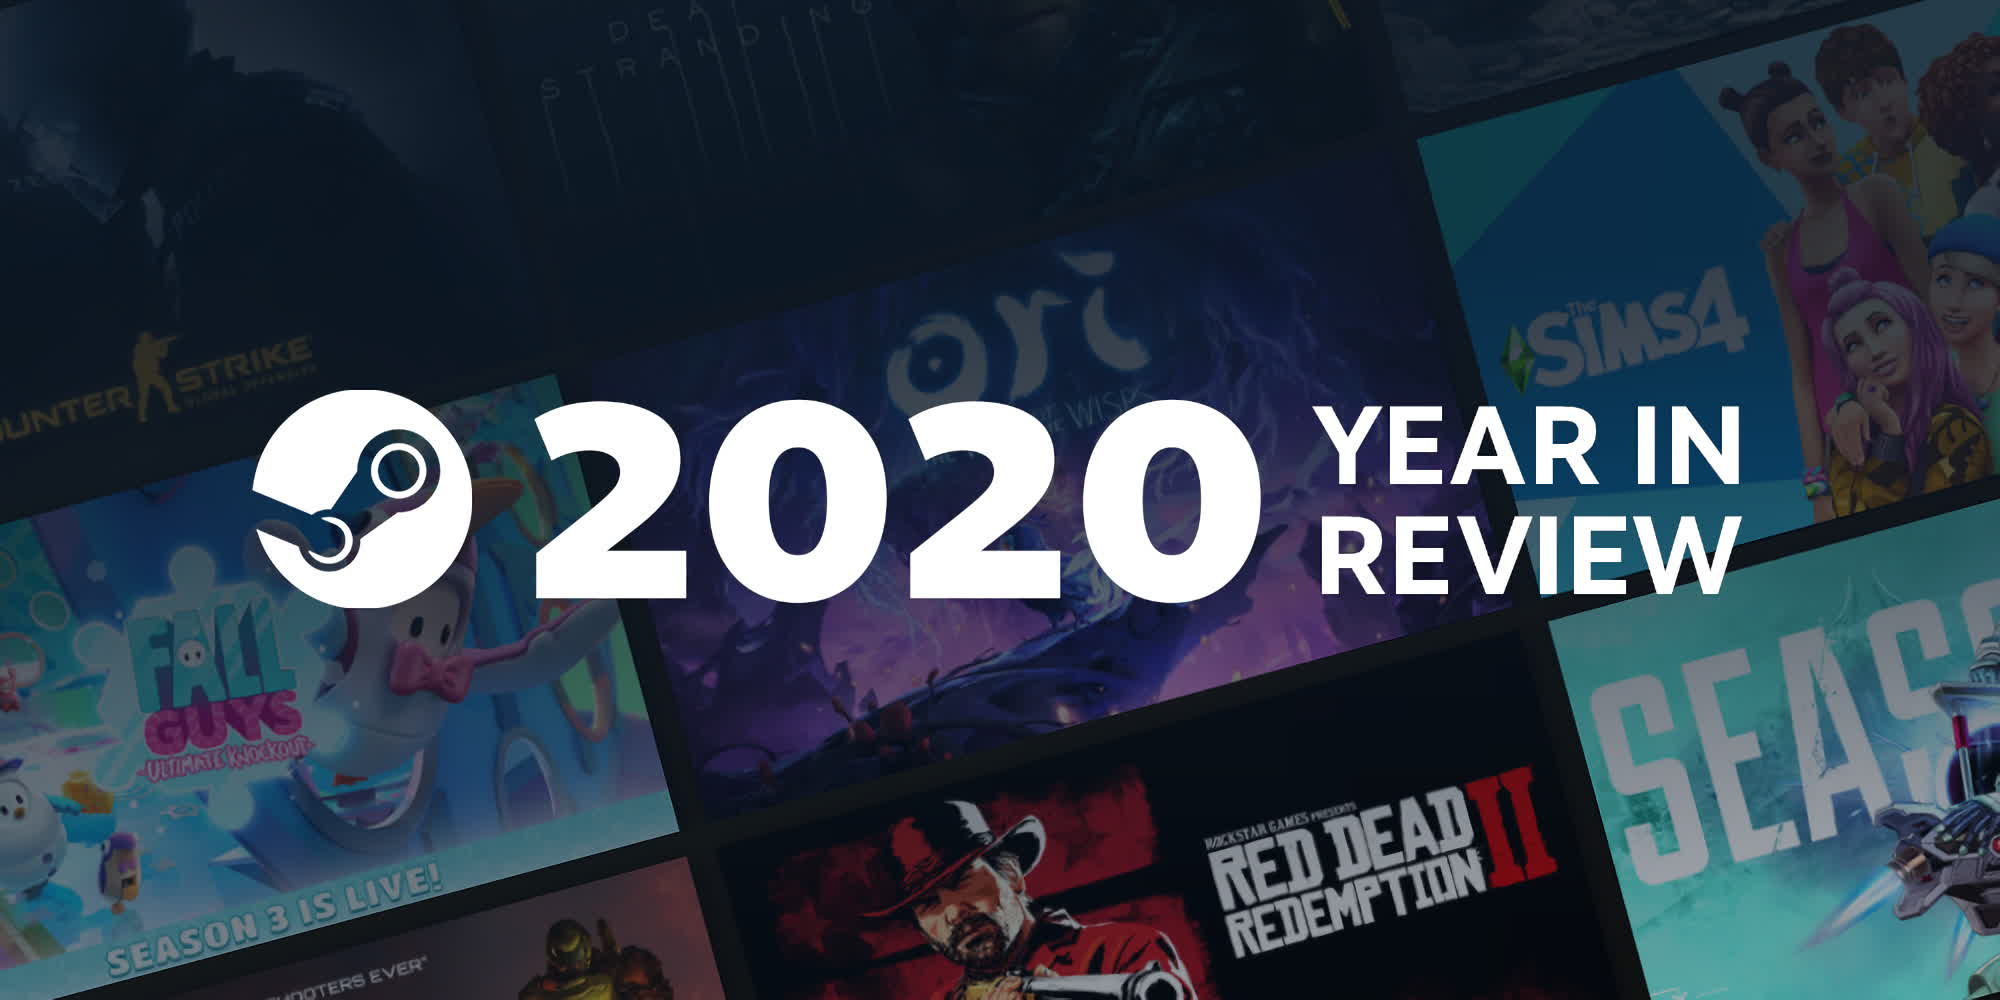 Steam reached 120 million monthly active users in 2020